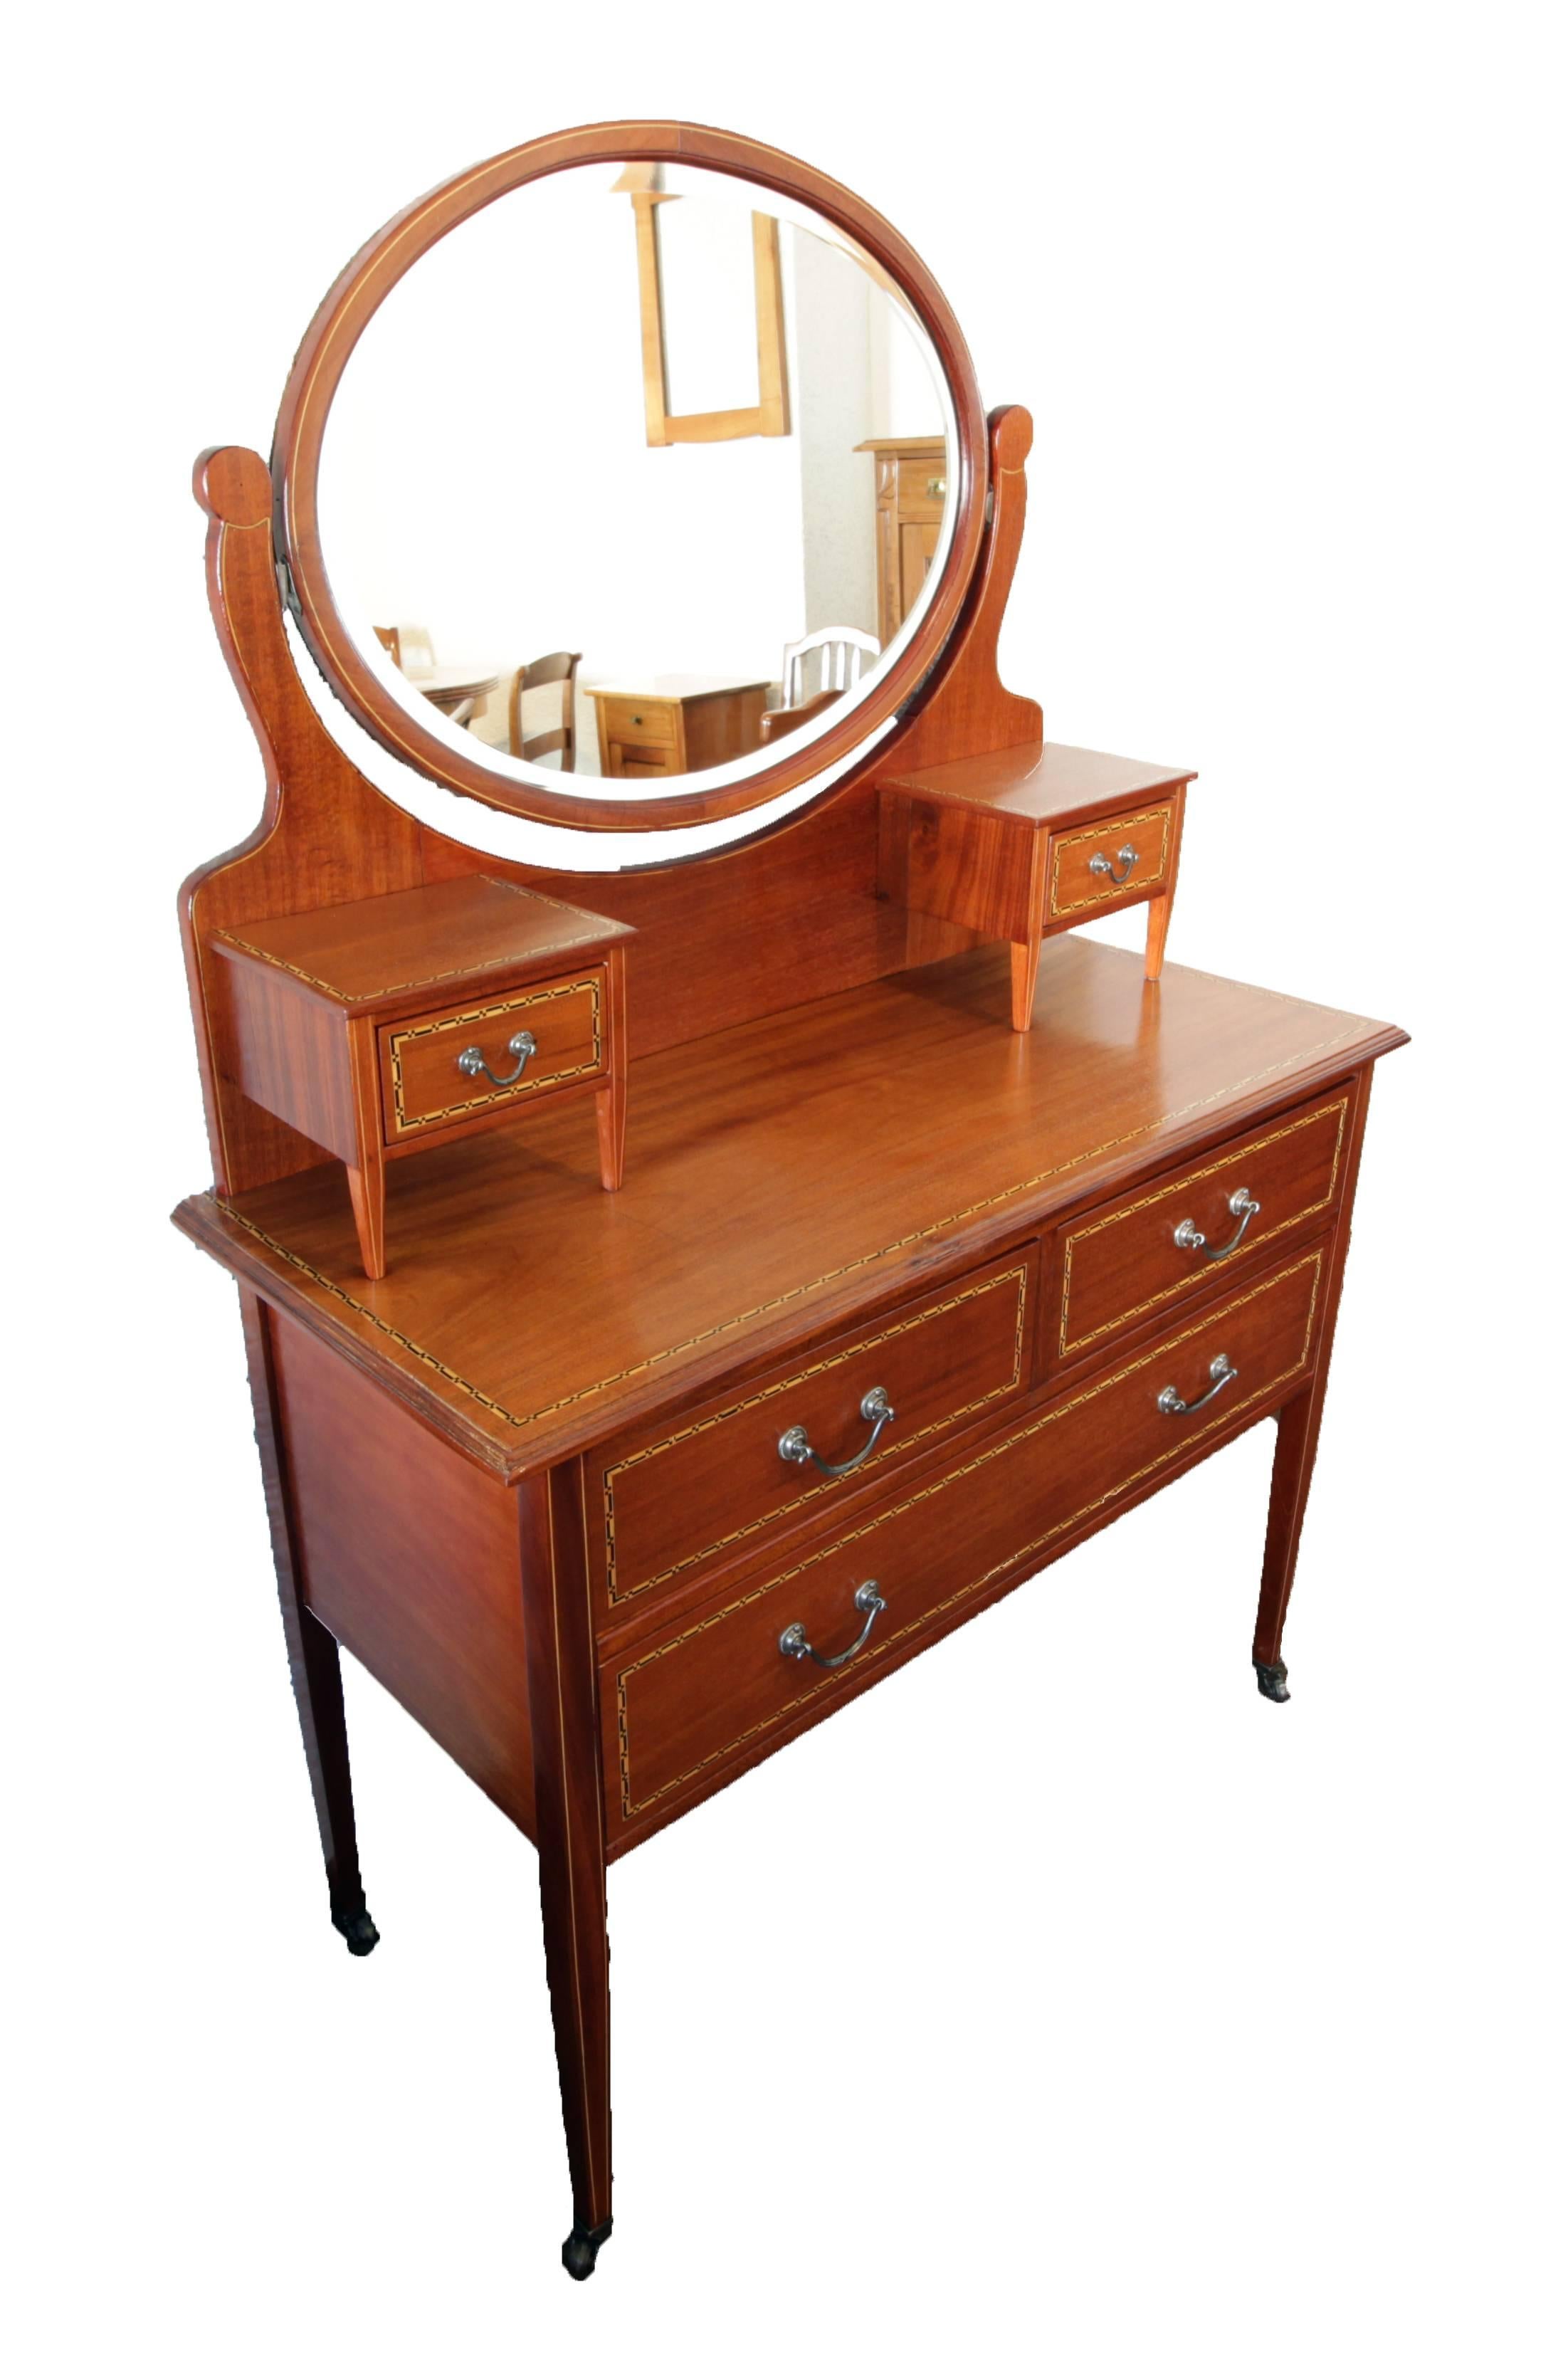 Well restored dressing table from circa 1900 from England. The table is made of mahogany with ribbon inlays.